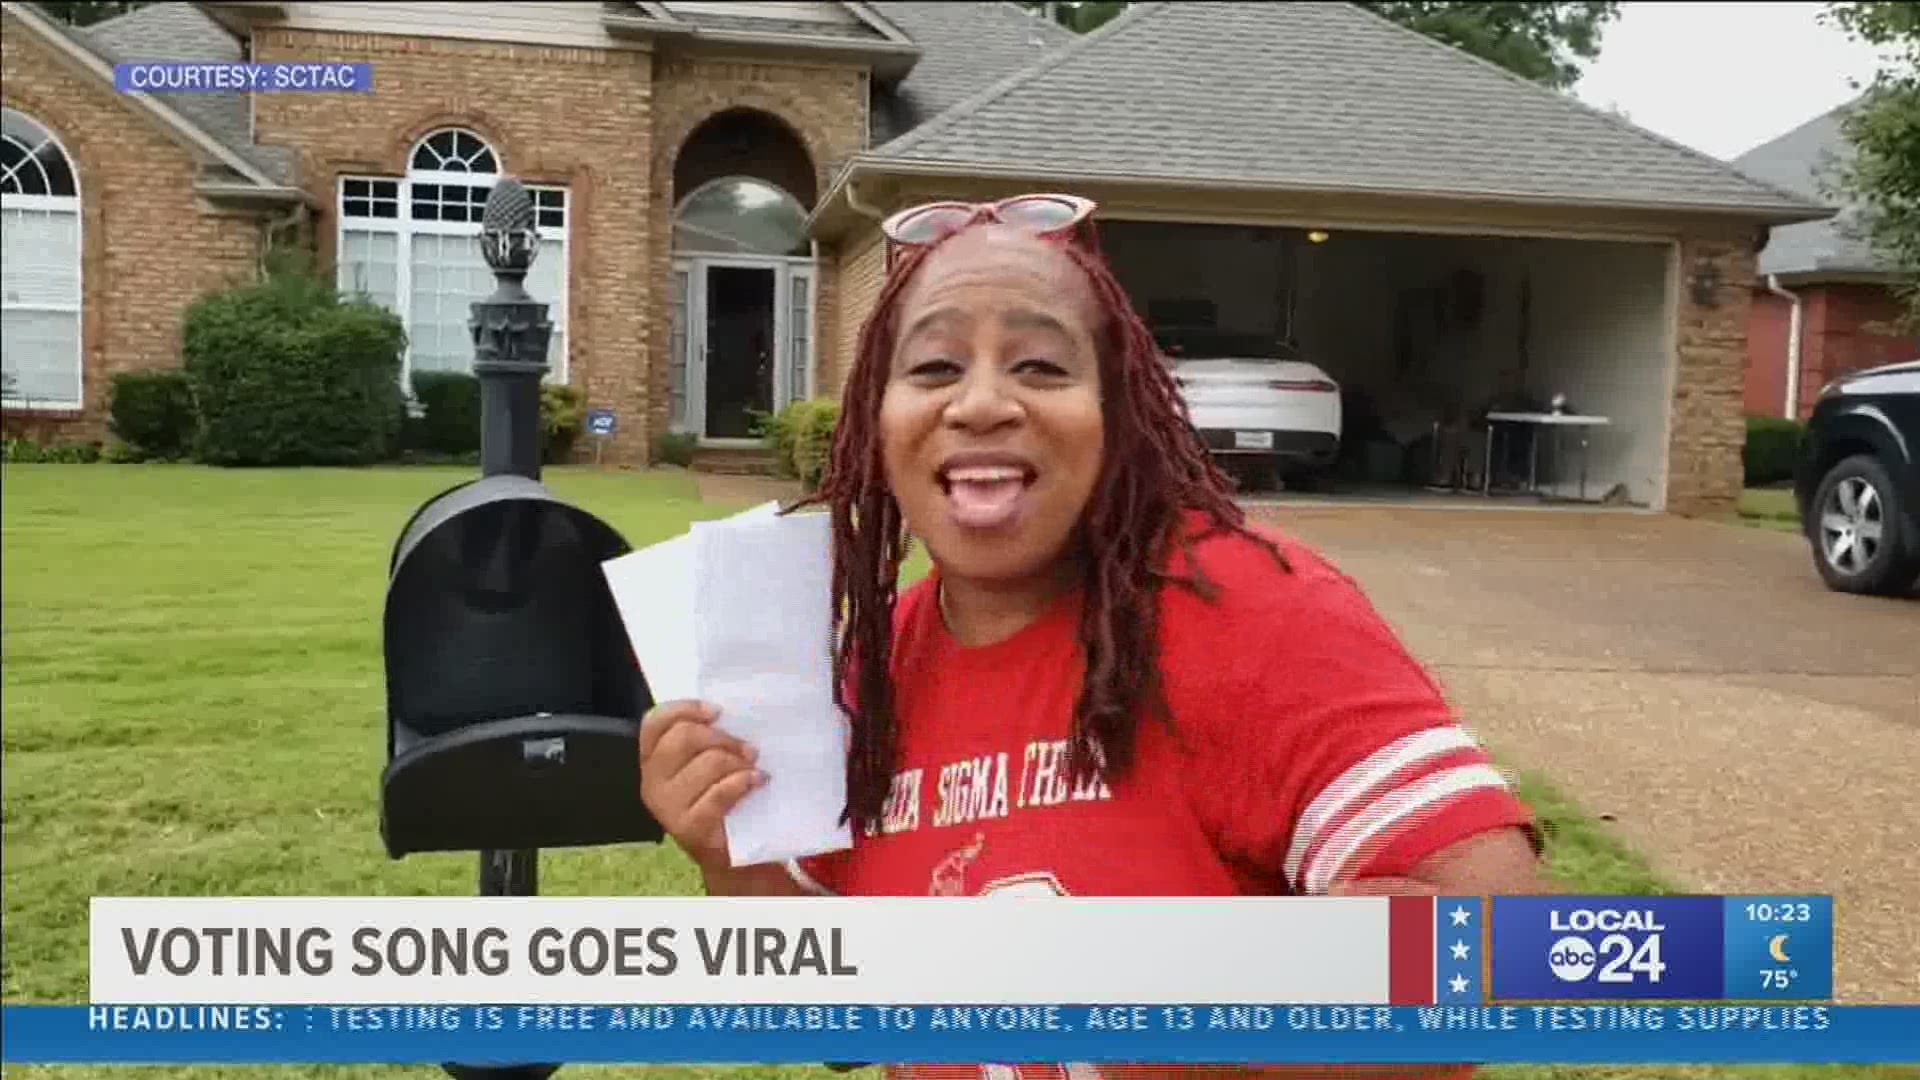 The Shelby County chapter of Delta Sigma Theta wrote a song about putting in your vote.